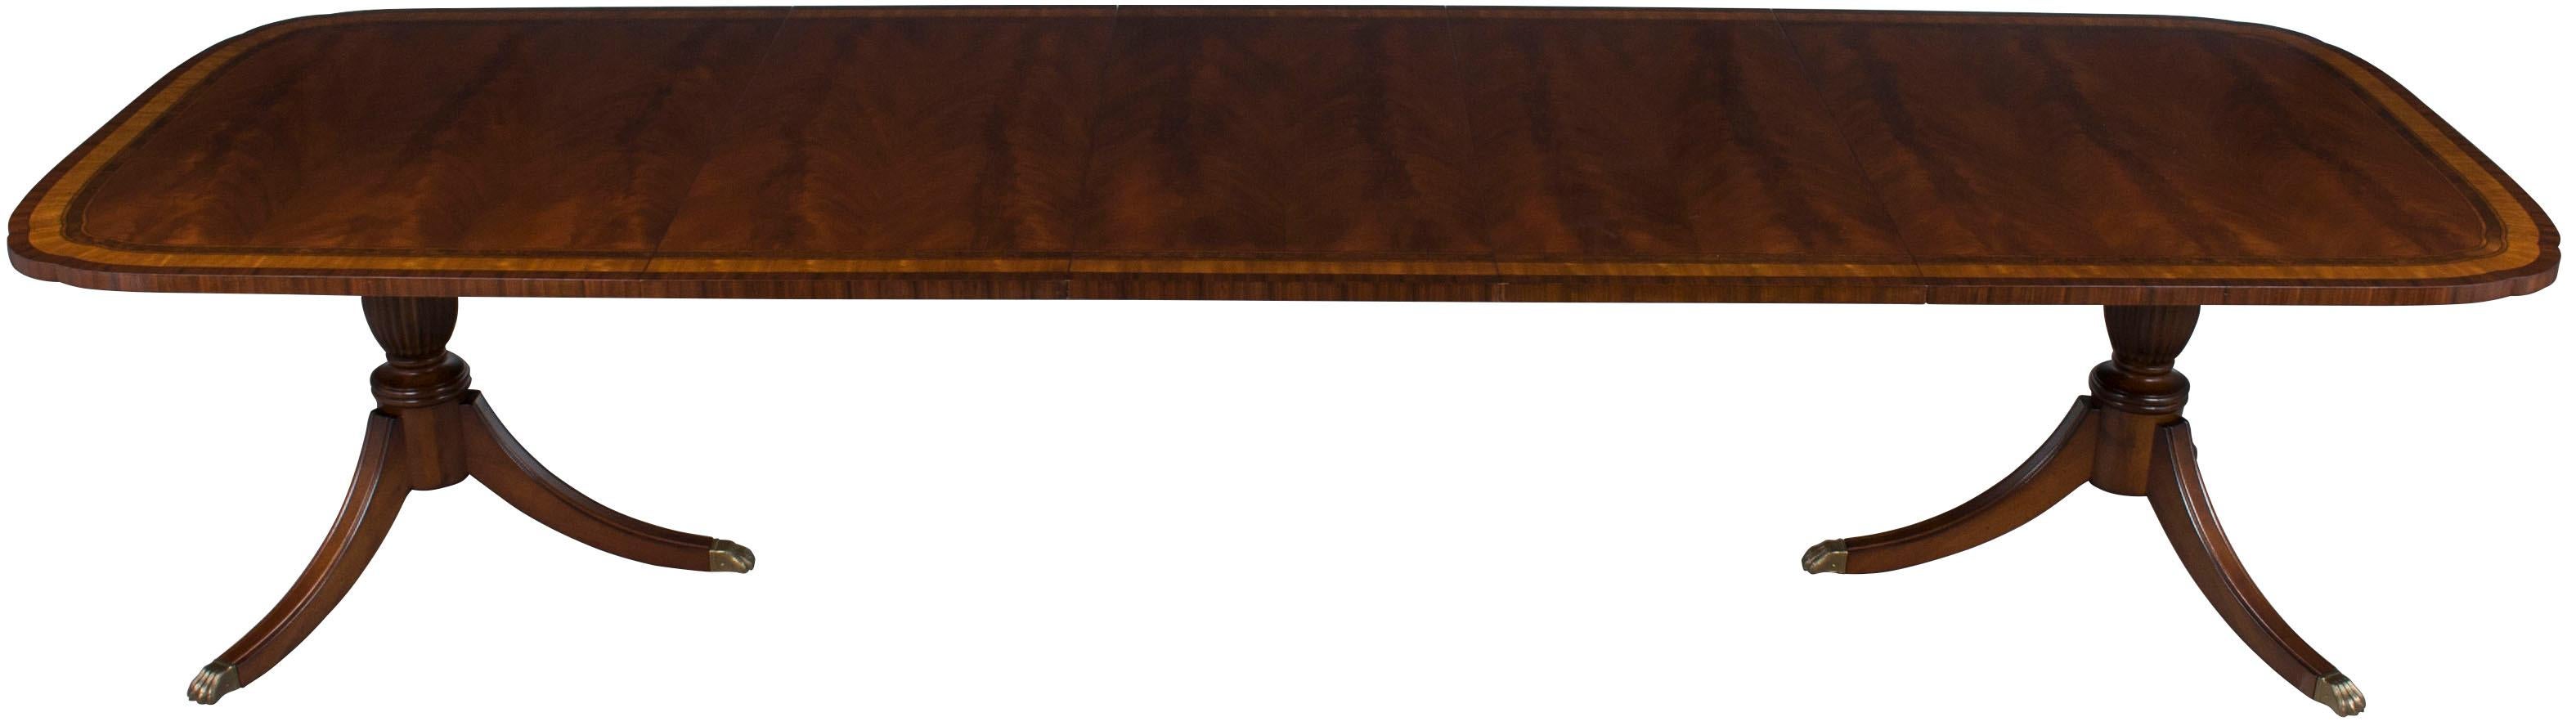 Twelve Foot Long Flame Mahogany Double Pedestal Dining Room or Conference Table For Sale 6